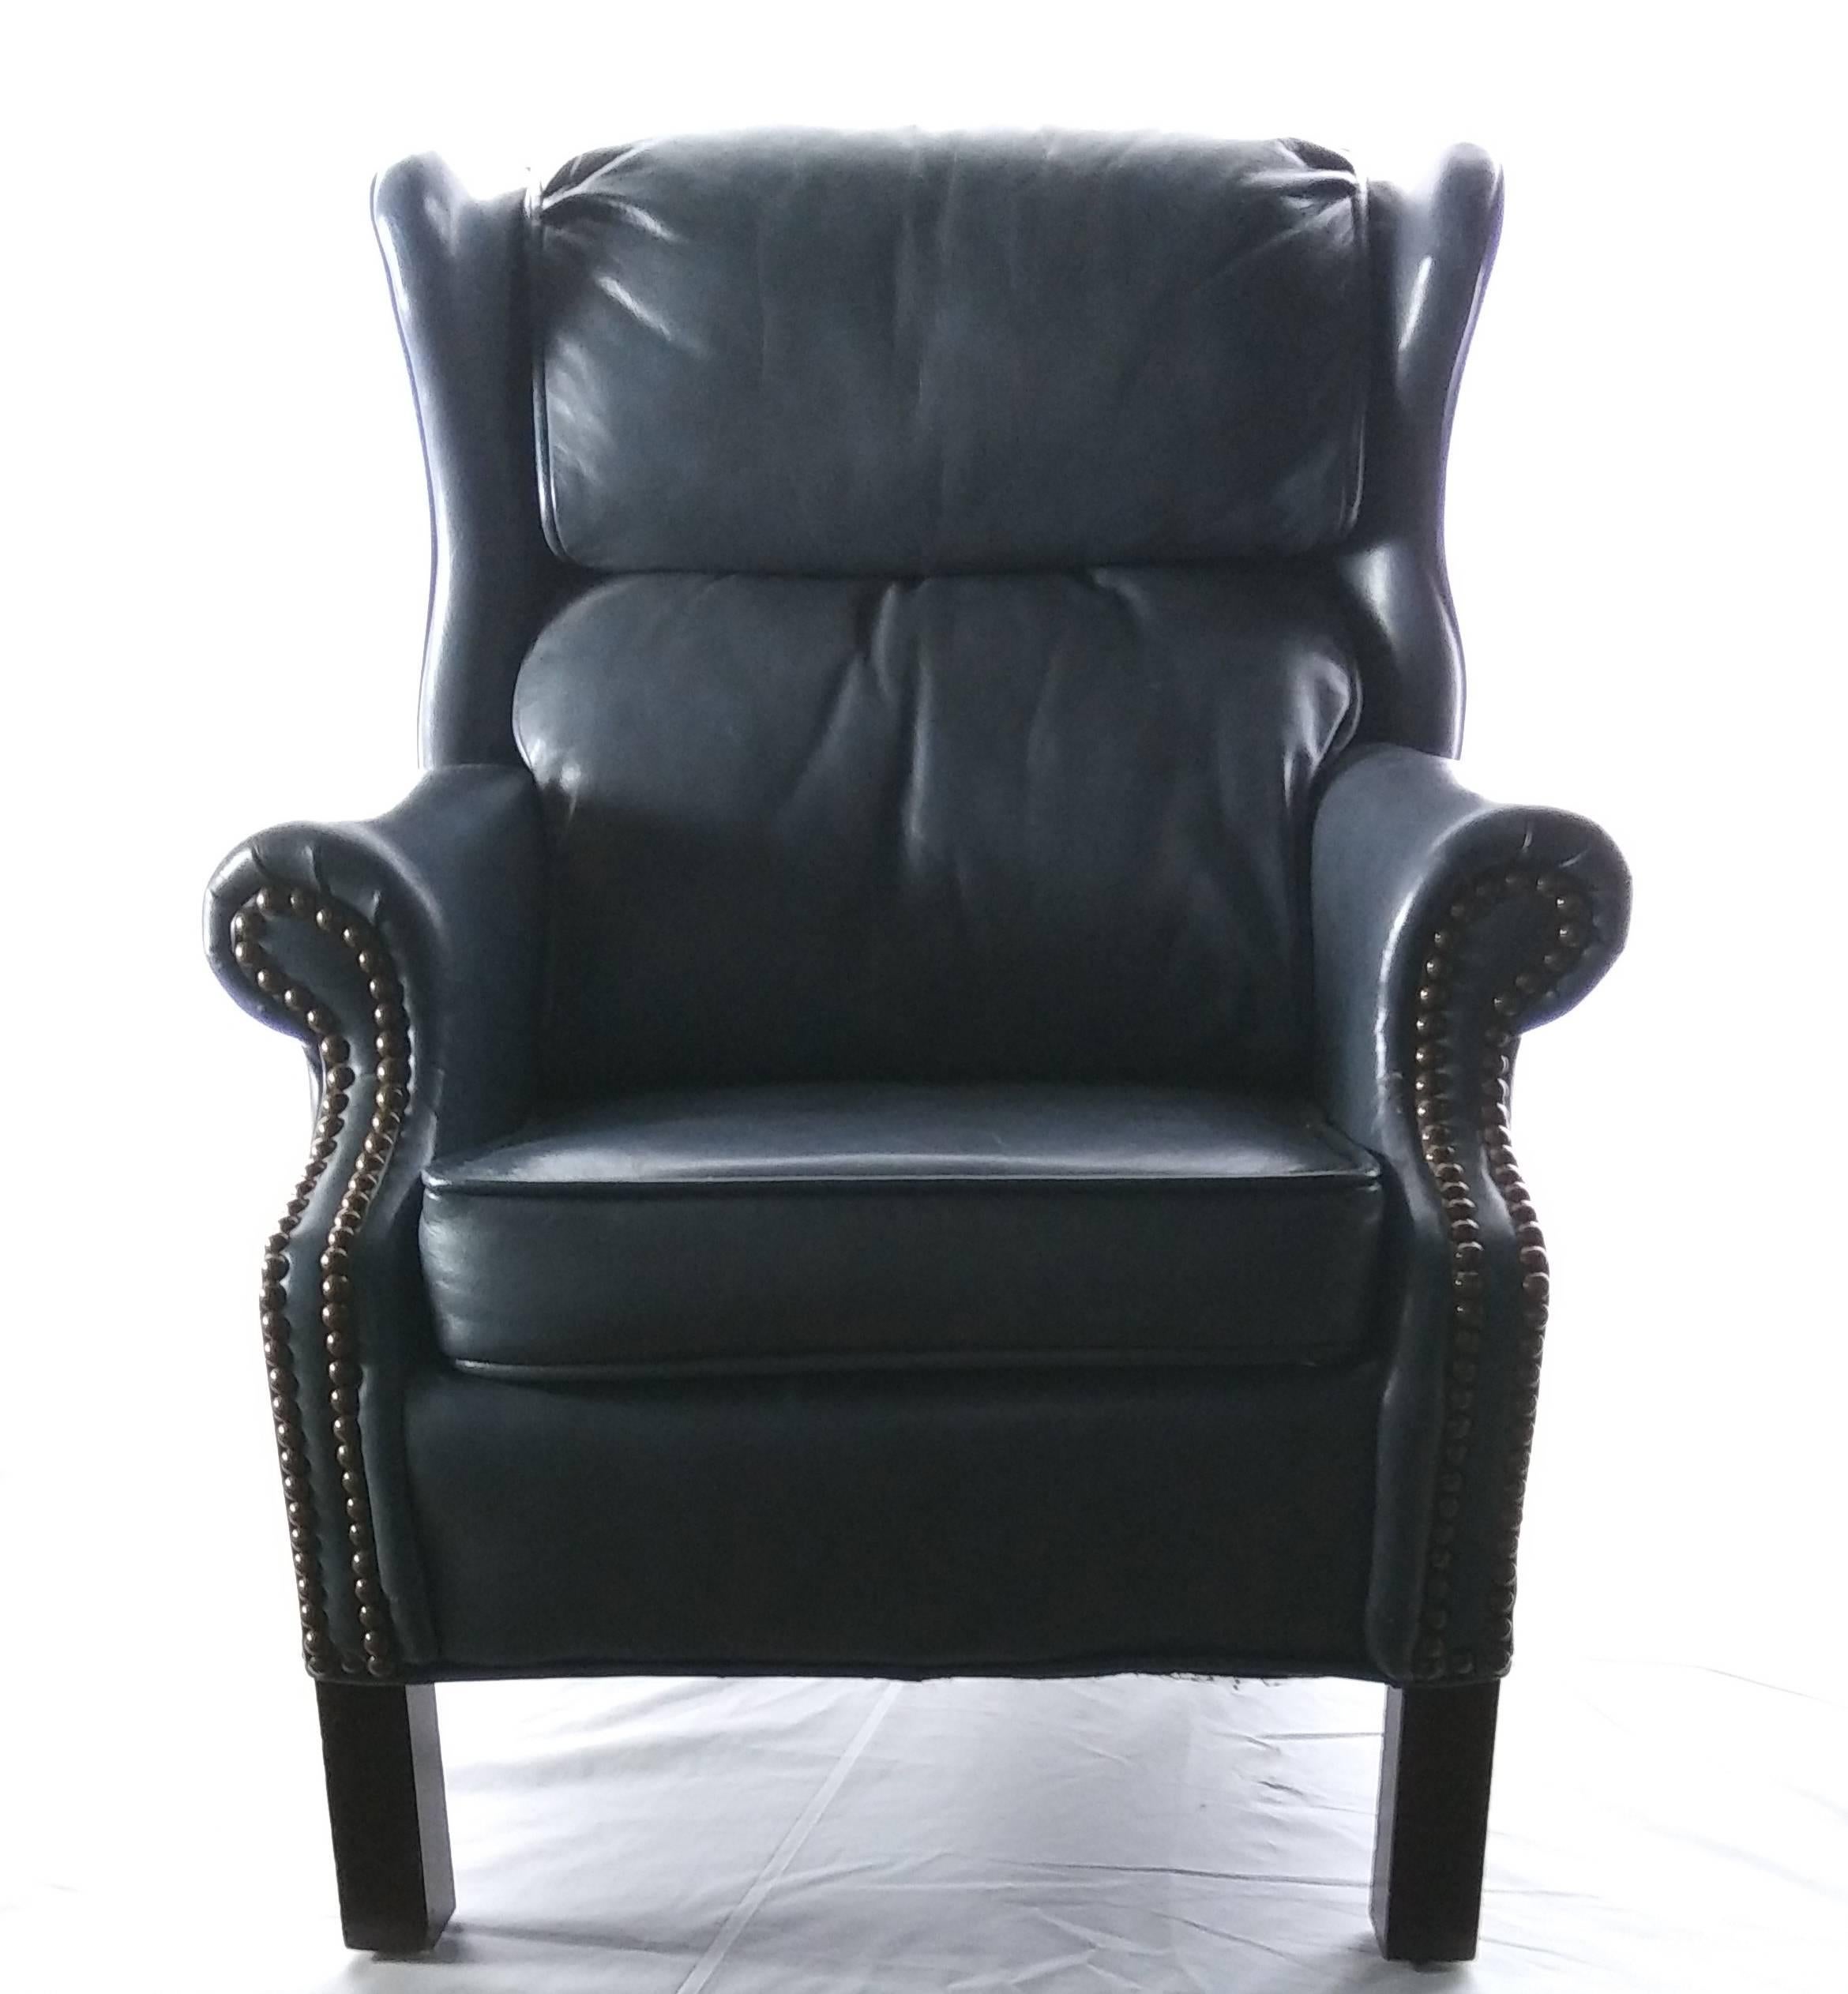 Late 20th Century Child's Executive in Training Leather Wing Back Arm Chair by Bradington Young